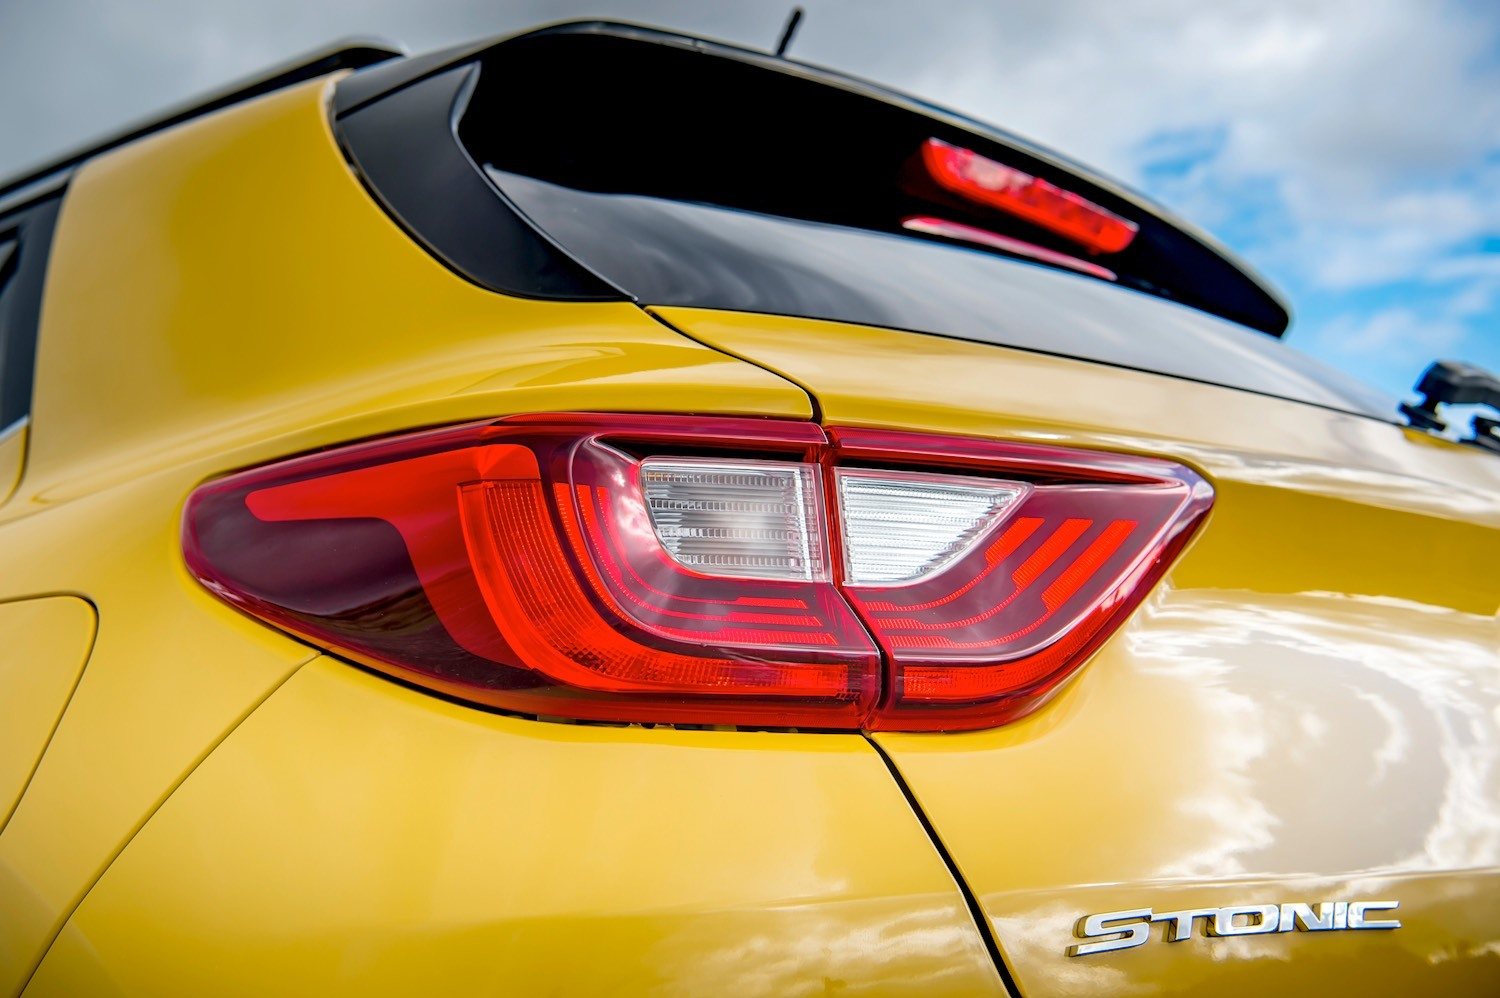 All New Kia Stonic reviewed by Tom Scanlan for Drive 8